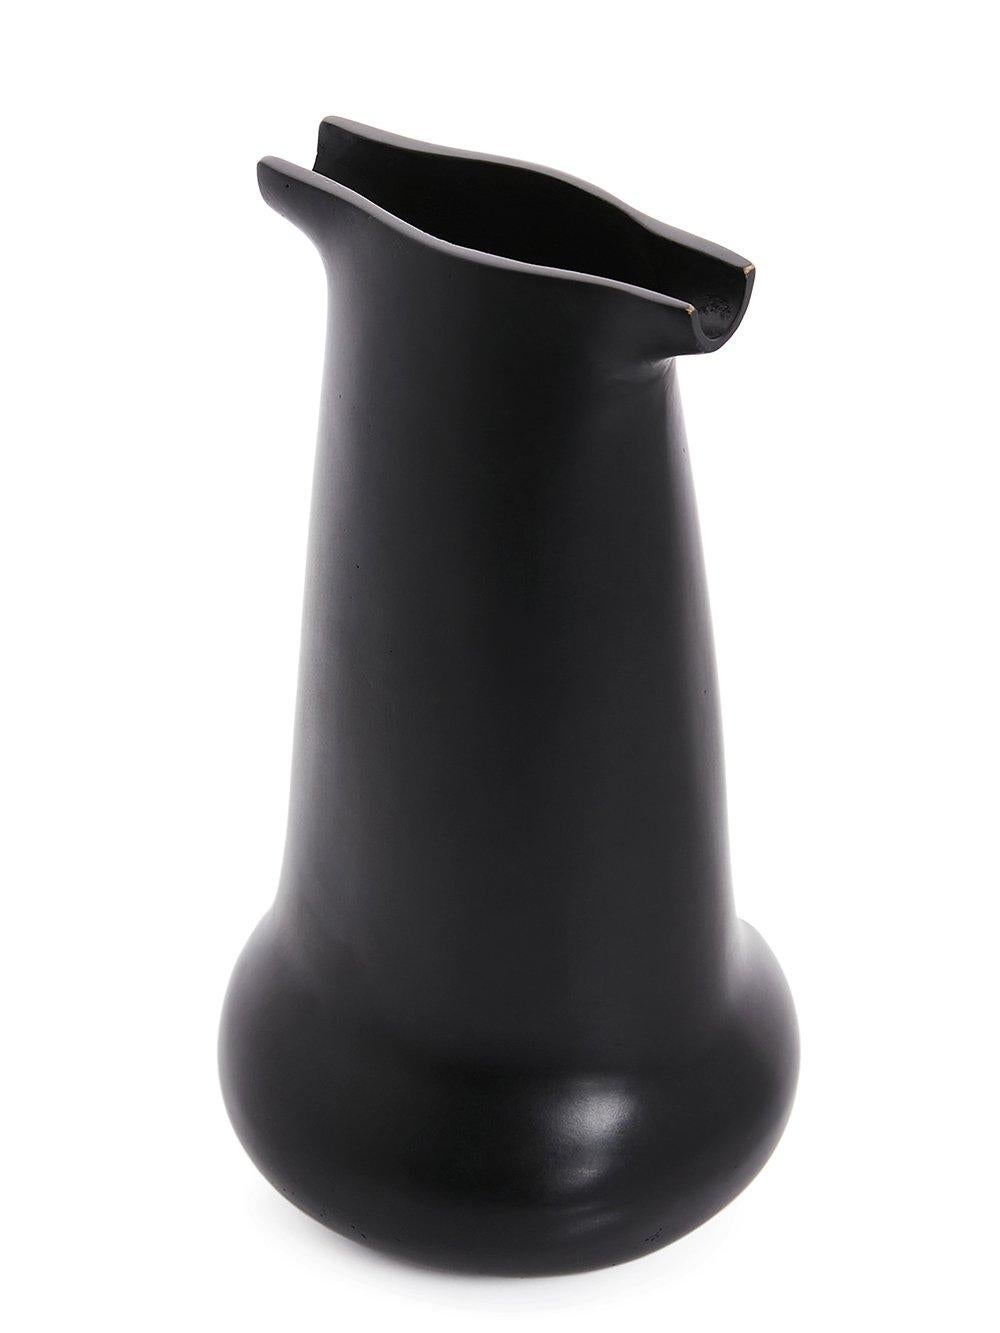 Bronze Carafe lips by Rick Owens
2019
Dimensions: L 14.5 x W 14.5 x H 27.5 cm
Materials: Bronze
Weight: 4.5 kg

Rick Owens is a California-born fashion and furniture has developed a unique style that he describes as “luxe minimalism.”
Though